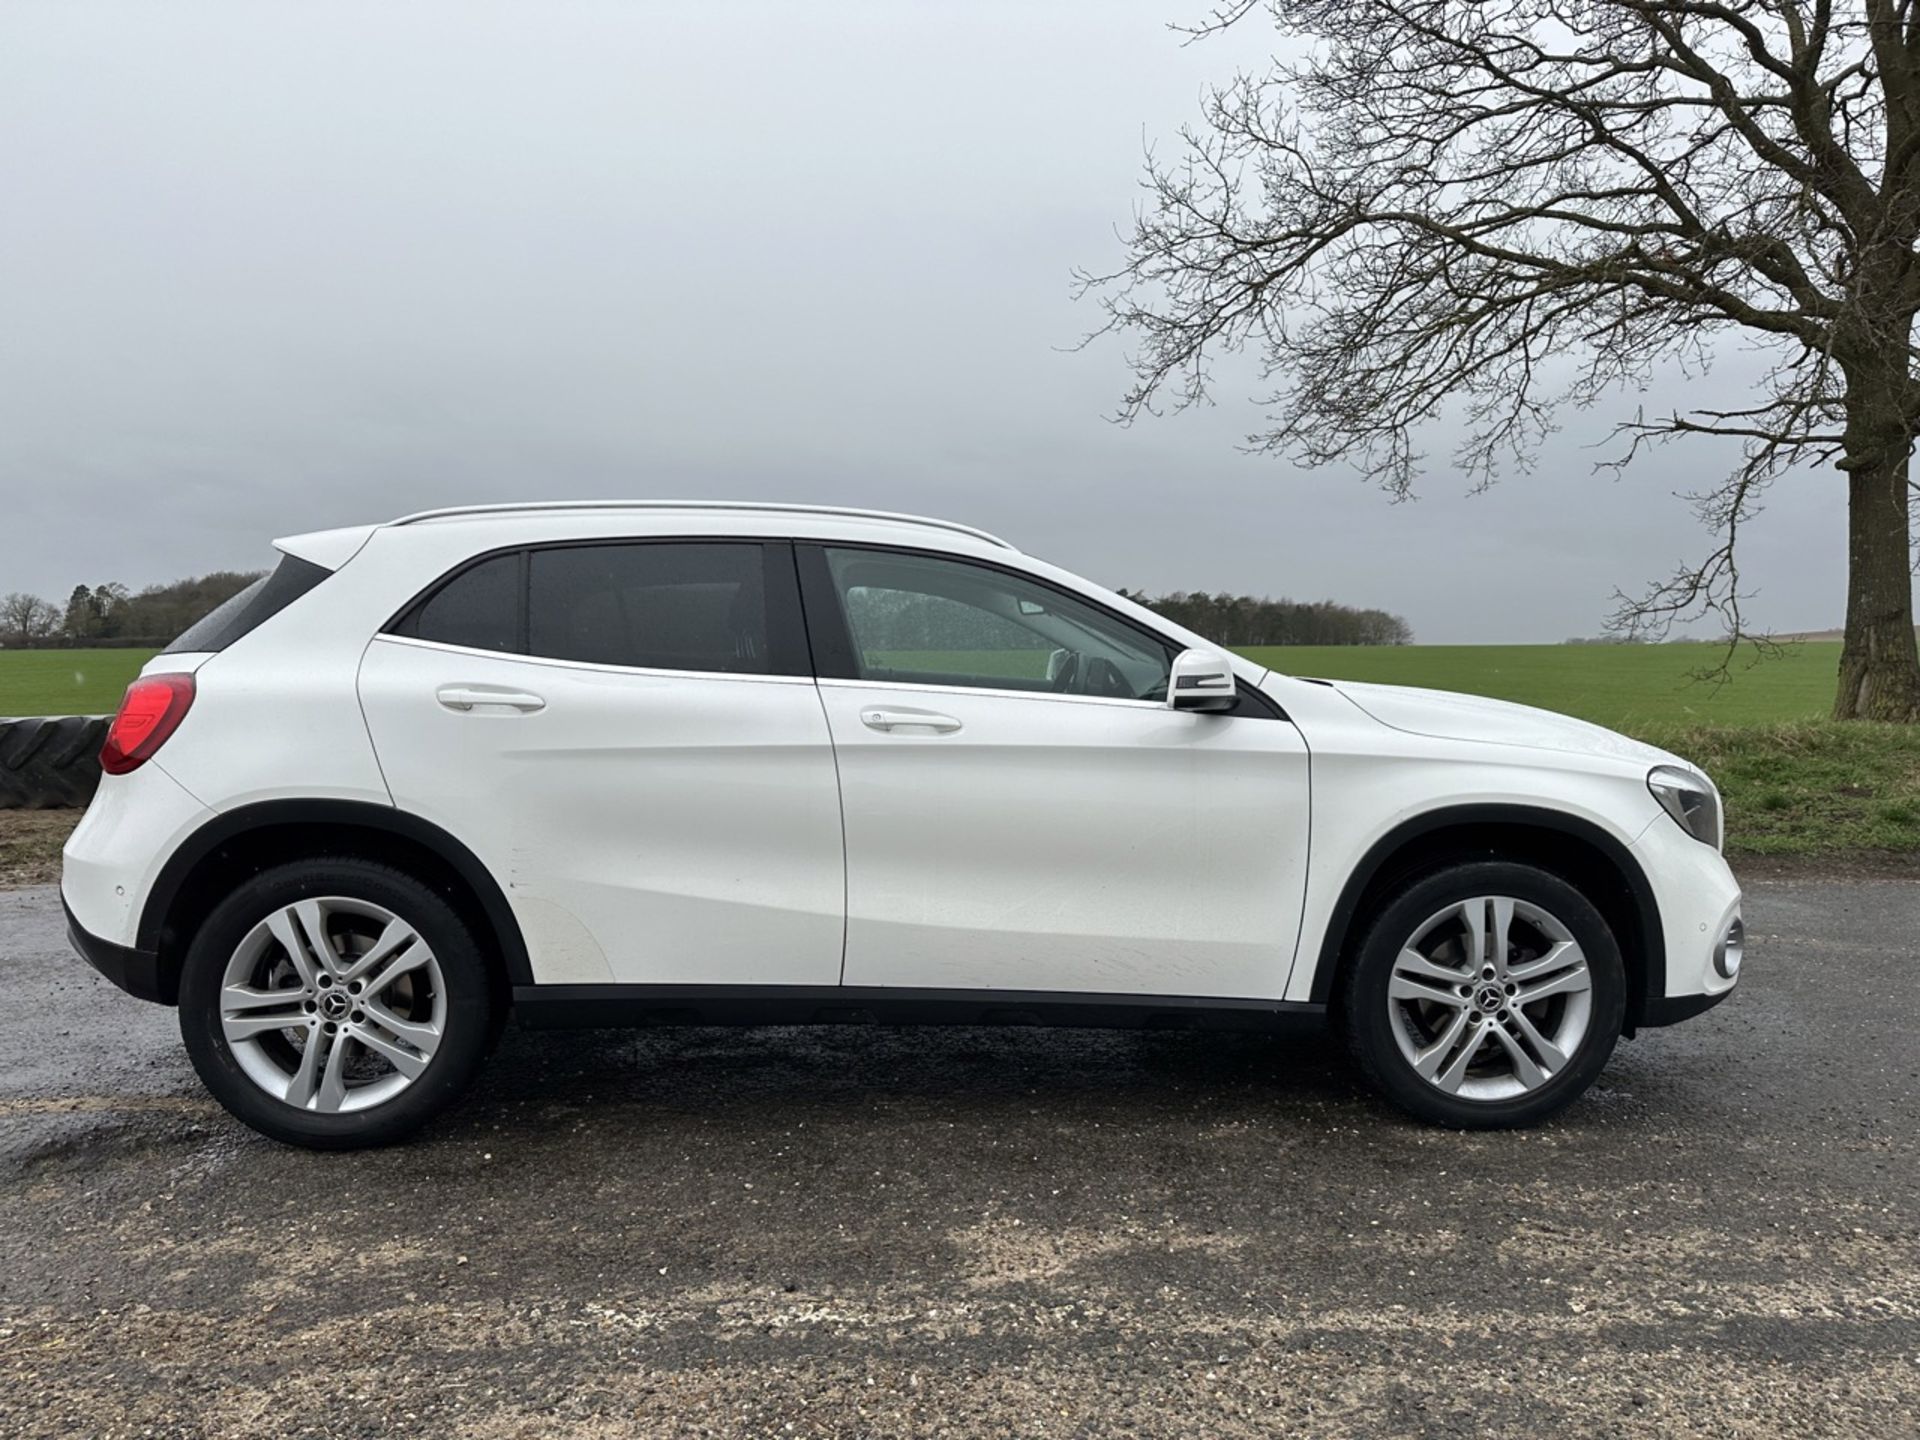 MERCEDES GLA 200d AUTO "SPORT EXECUTIVE" 2019 MODEL - LEATHER - LOW MILES - AIR CON - Image 9 of 17